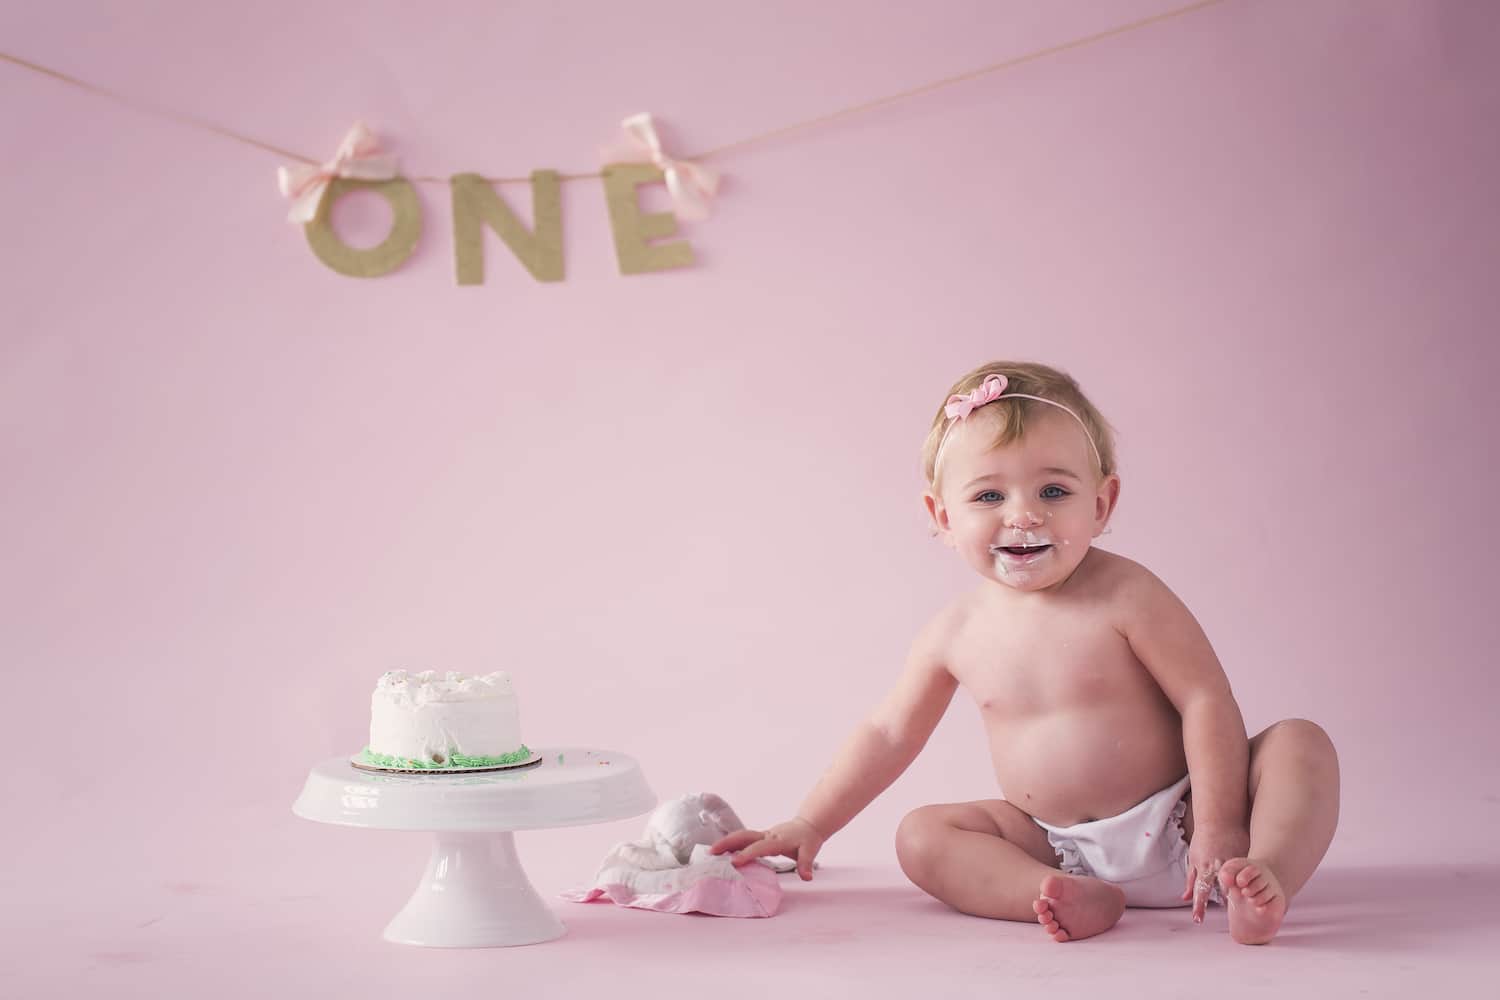 In this in-depth video tutorial, you'll learn how to plan, produce, light, market, price, and retouch newborn photography shoots for 5 different stages of a baby's first year. Includes post-production workflows so that you can create an experience your clients will love. 12 month cake shot idea for newborns. Posing and lighting tutorials for photographers online.